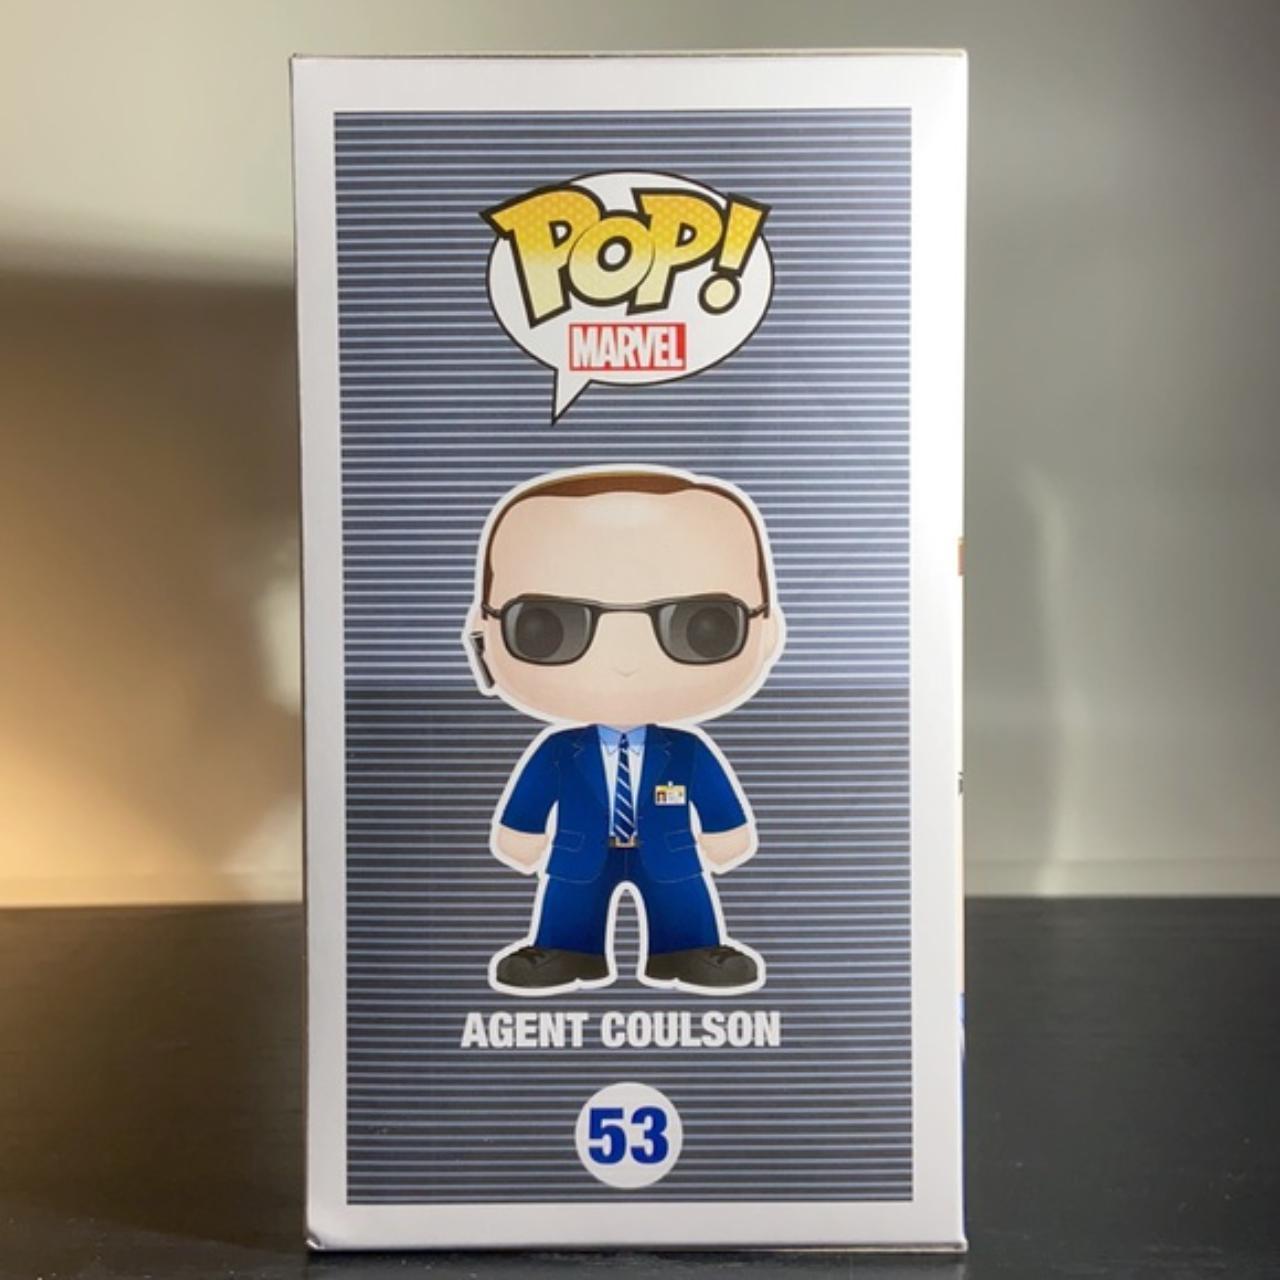 Product Image 3 - Agent Coulson
Type: Vinyl Art Toys
Brand: